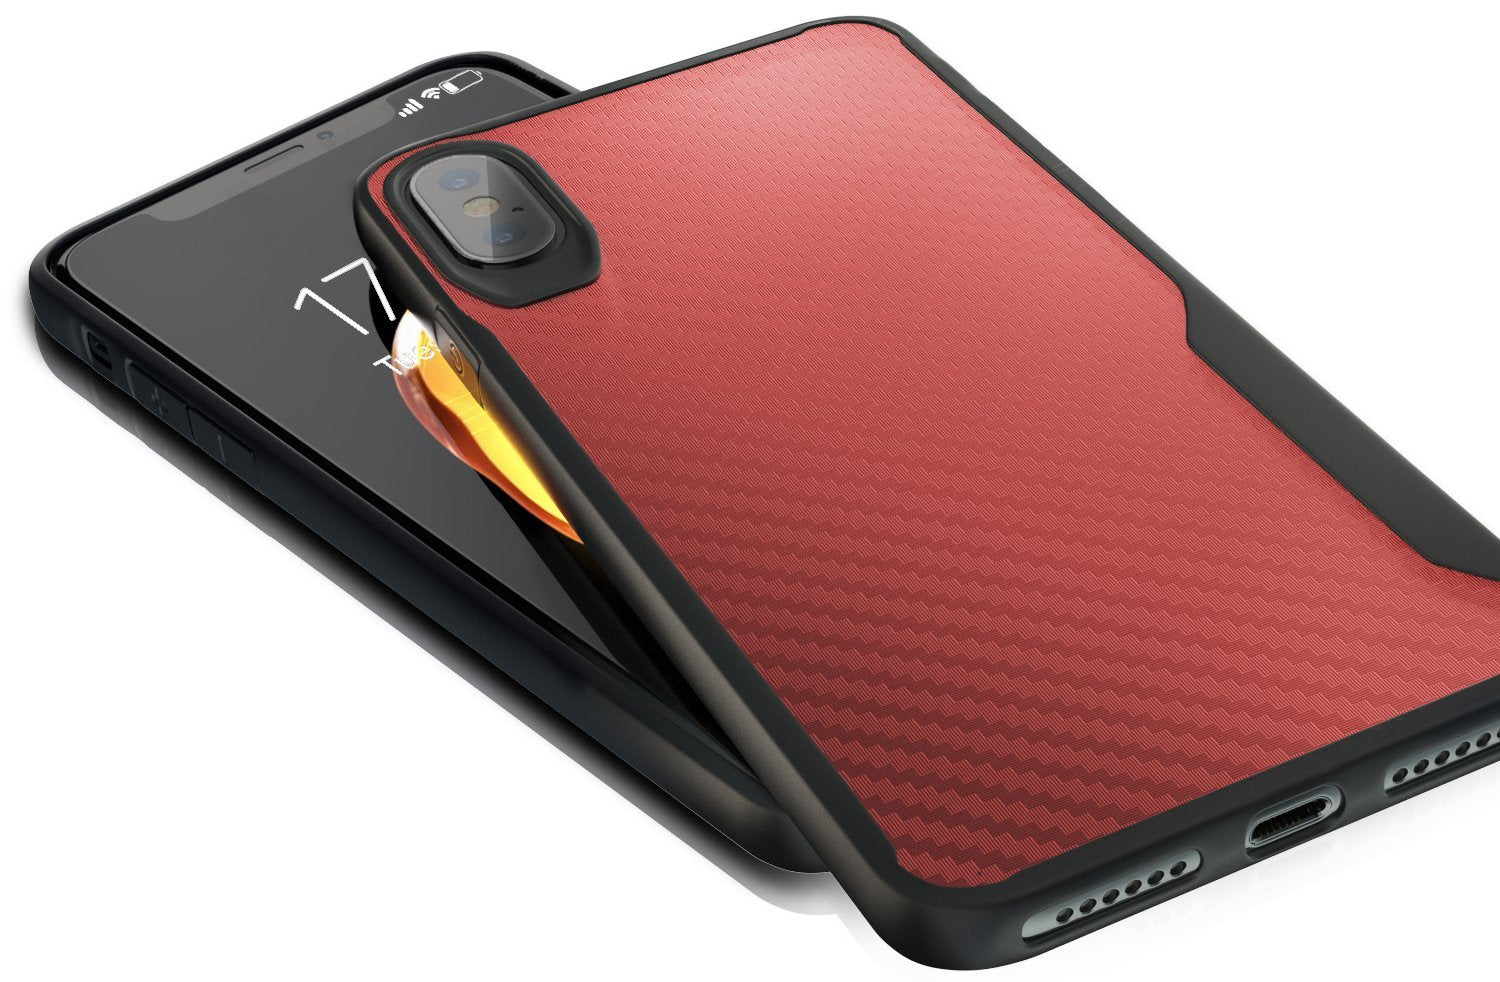 iPhone X / iPhone Xs Kitoo Carbon Fiber Pattern Case Red